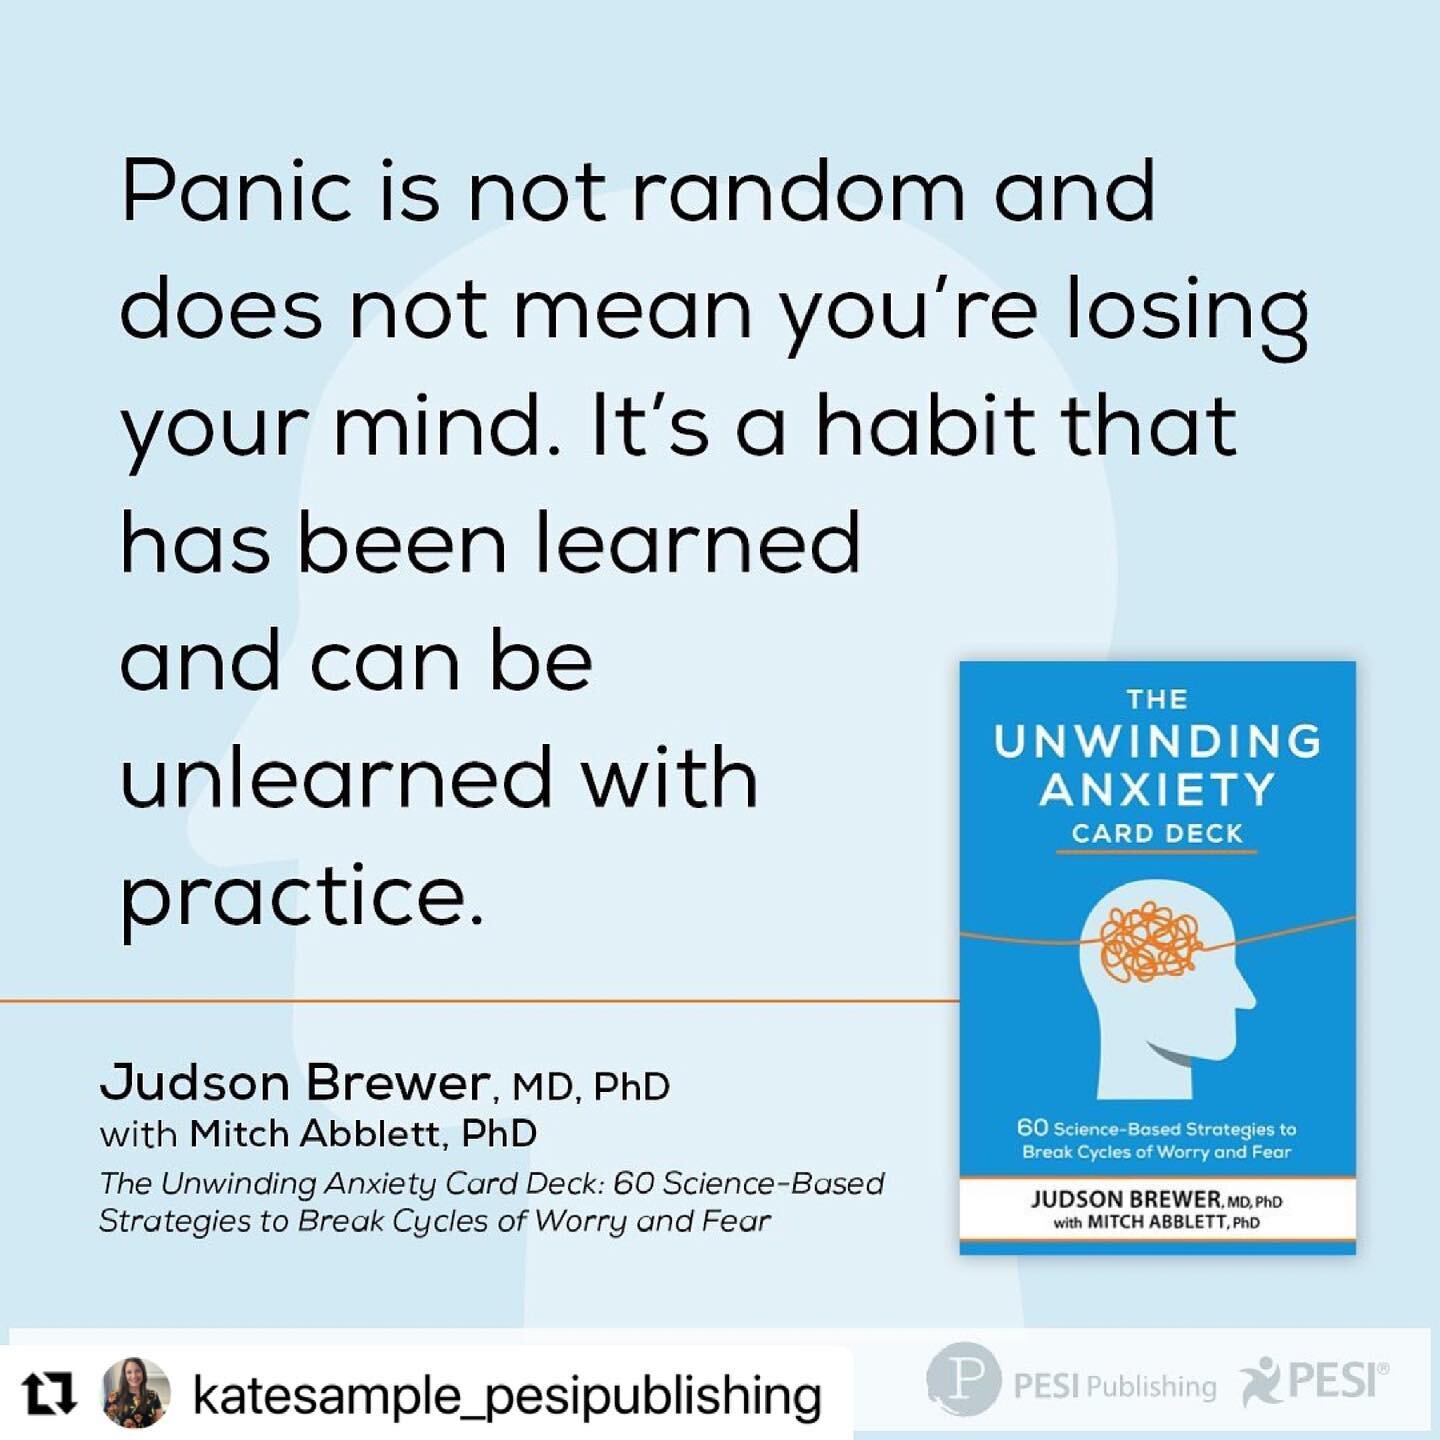 Signing up now! The resource looks amazing, too, so thought I would share. 🙌🏼

#Repost @katesample_pesipublishing with @make_repost
・・・
FREE training event with the authors of The Unwinding Anxiety card deck, @dr.jud and @dr_mitchabblett , with spe